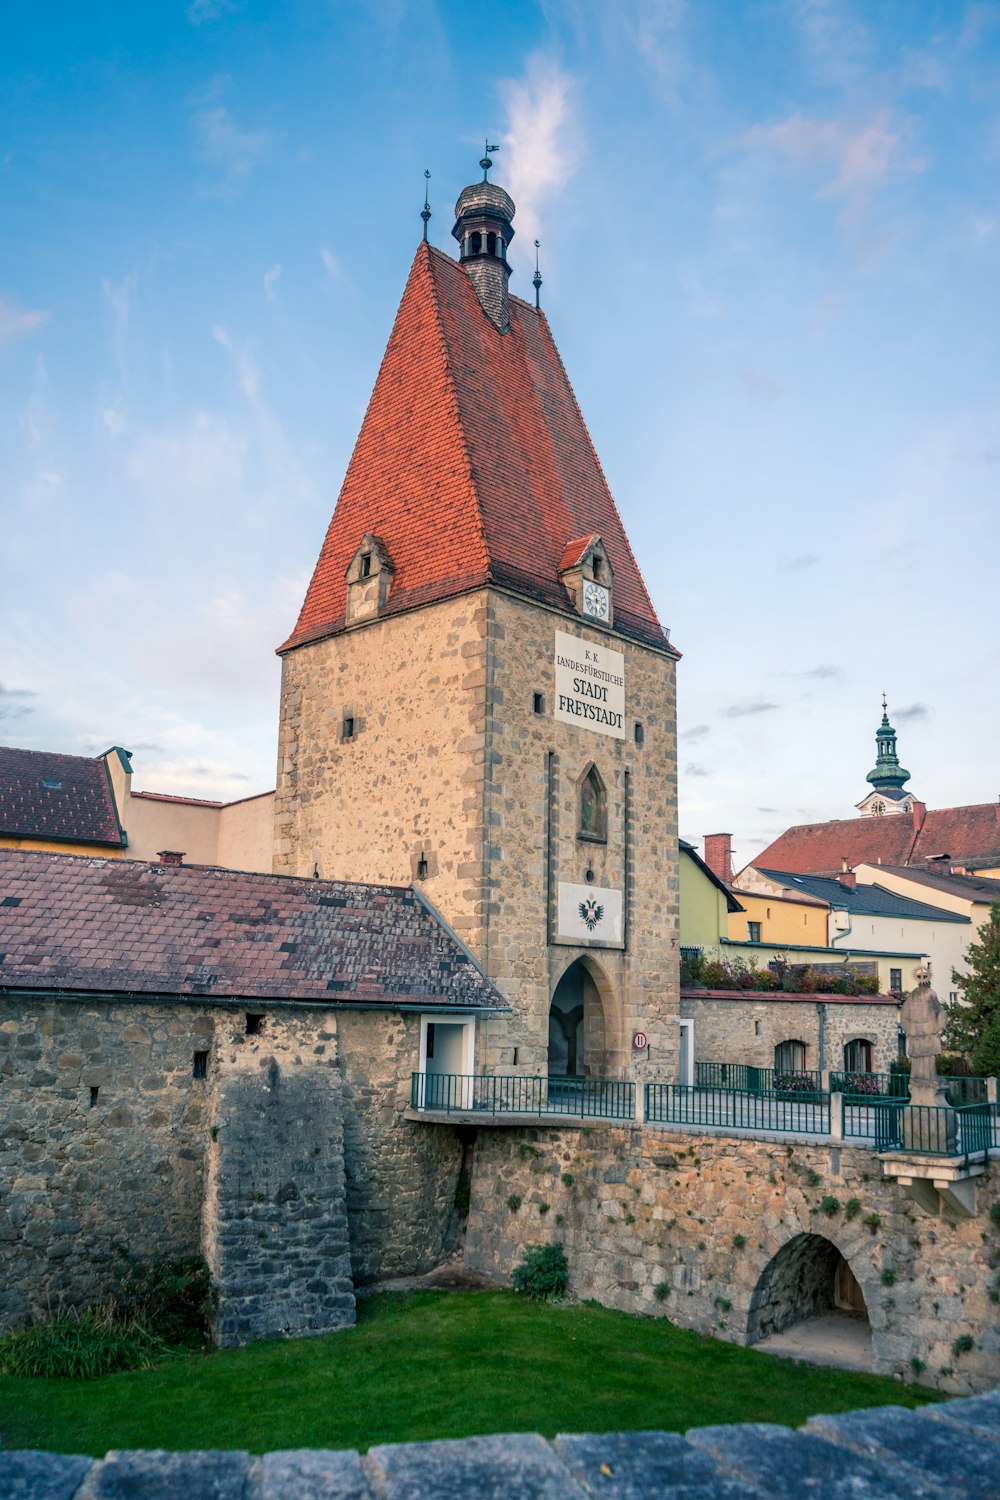 an old building with a tower with a clock on it